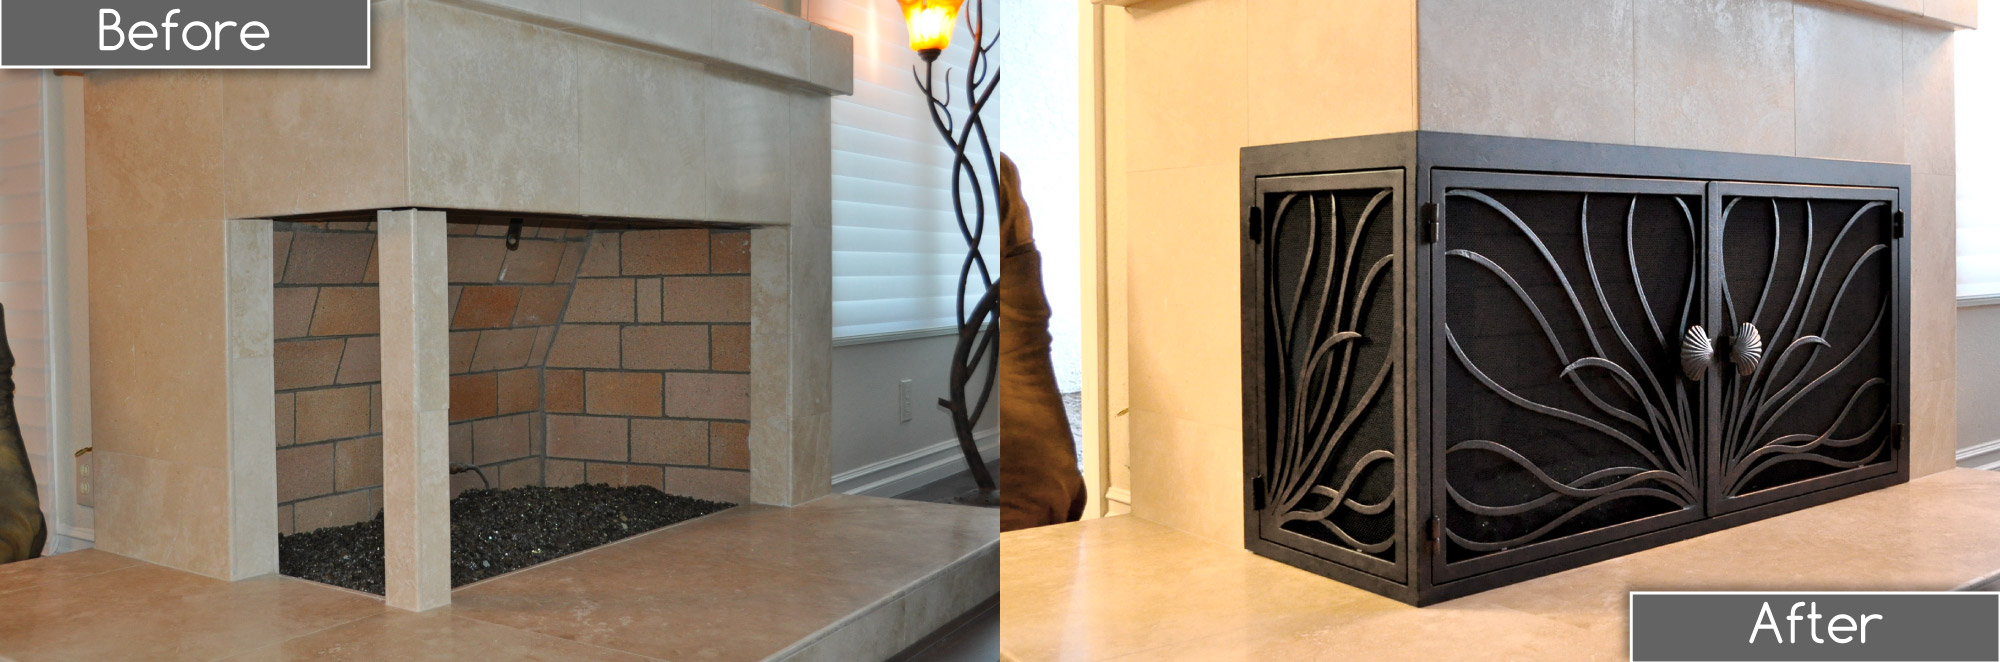 Coral 15 L-Shape Fireplace Door Before and After